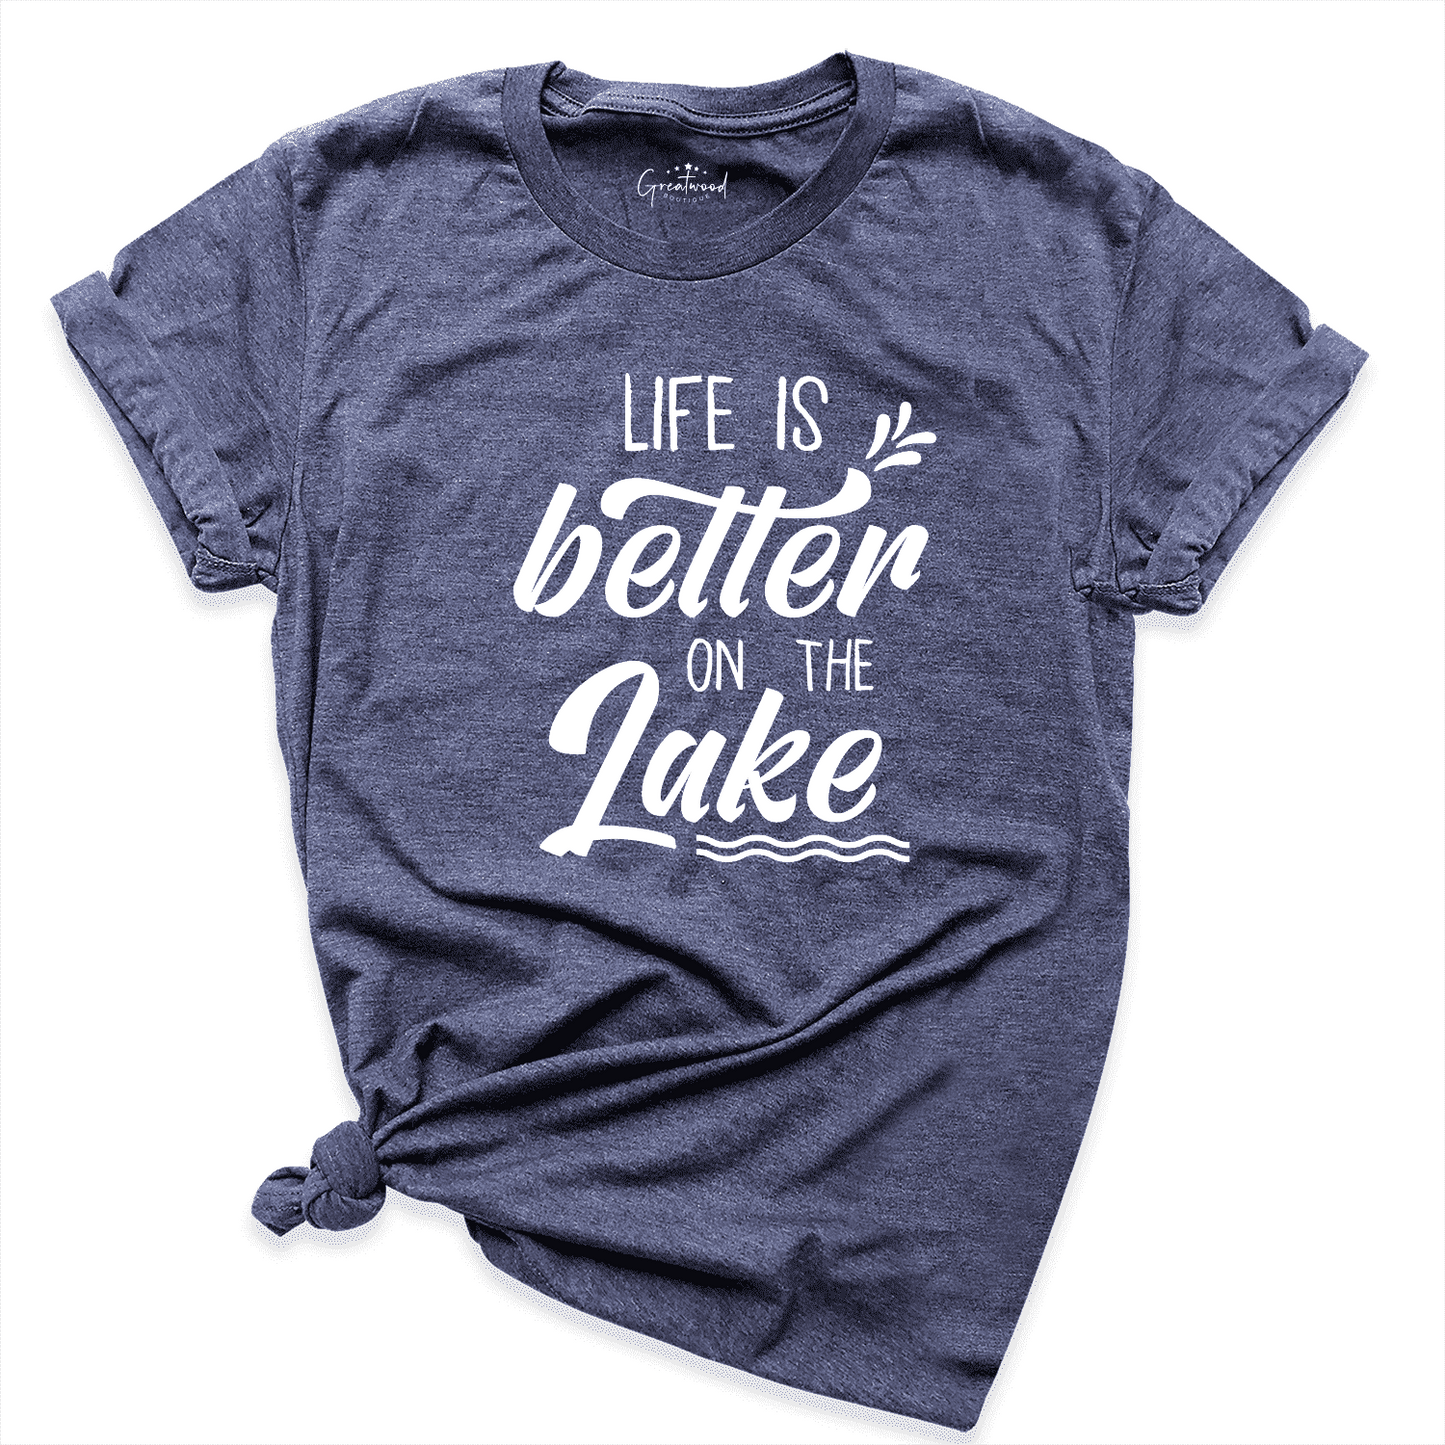 Life Is The On The Lake Shirt Navy - Greatwood Boutique